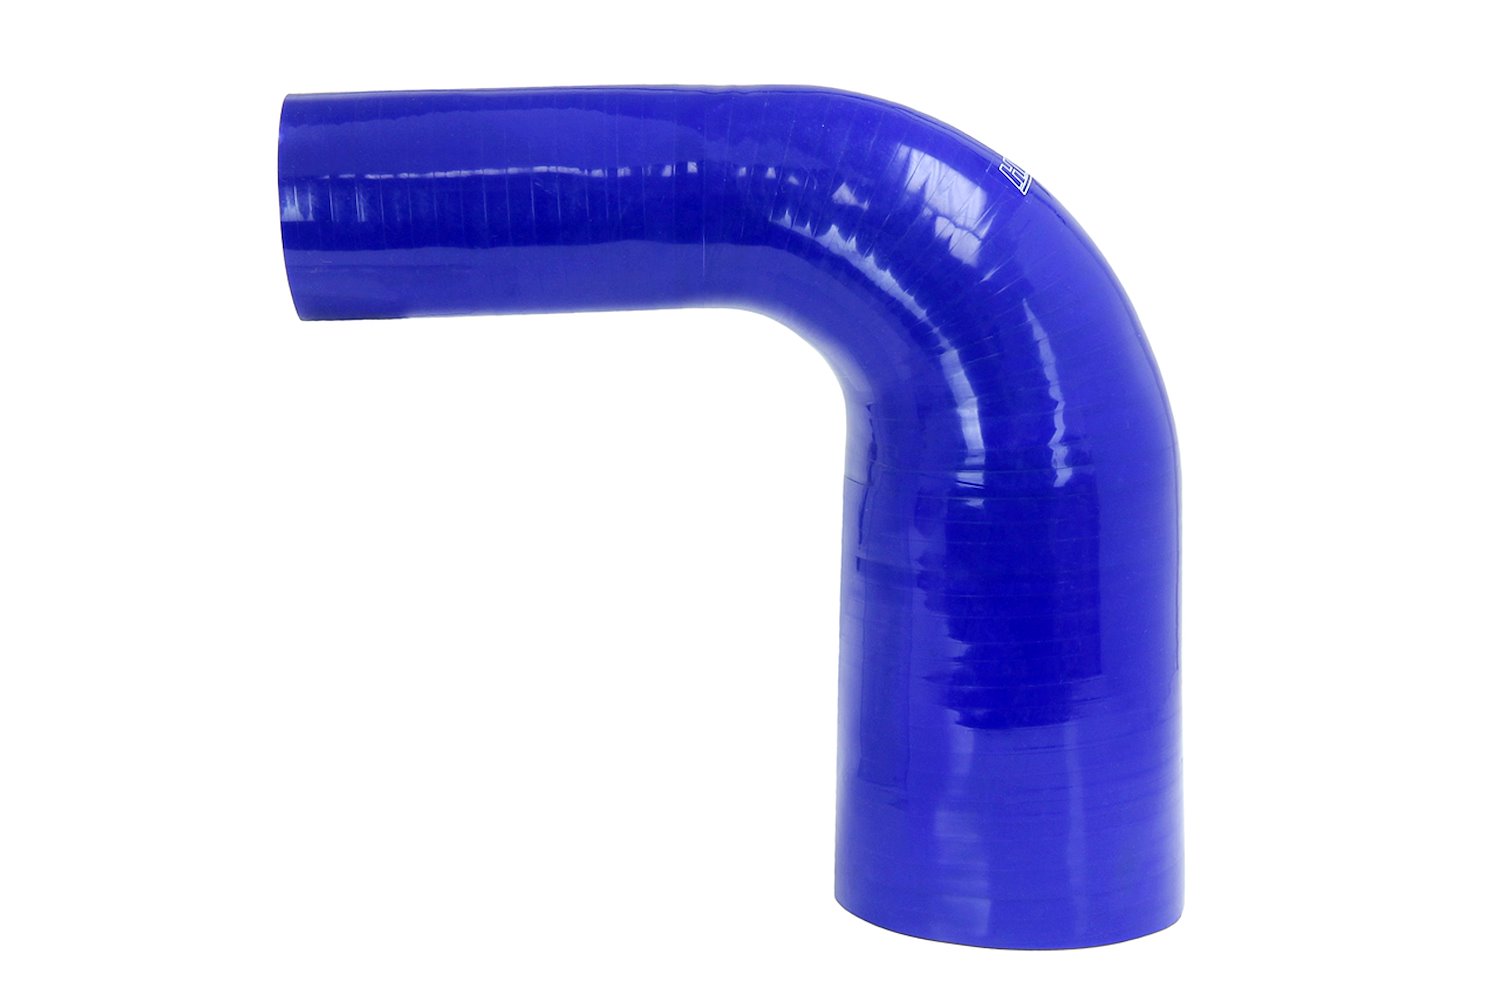 HTSER90-200-325-BLUE Silicone 90-Degree Elbow Hose, High-Temp 4-Ply Reinforced, 2 in. - 3-1/4 in. ID, Blue